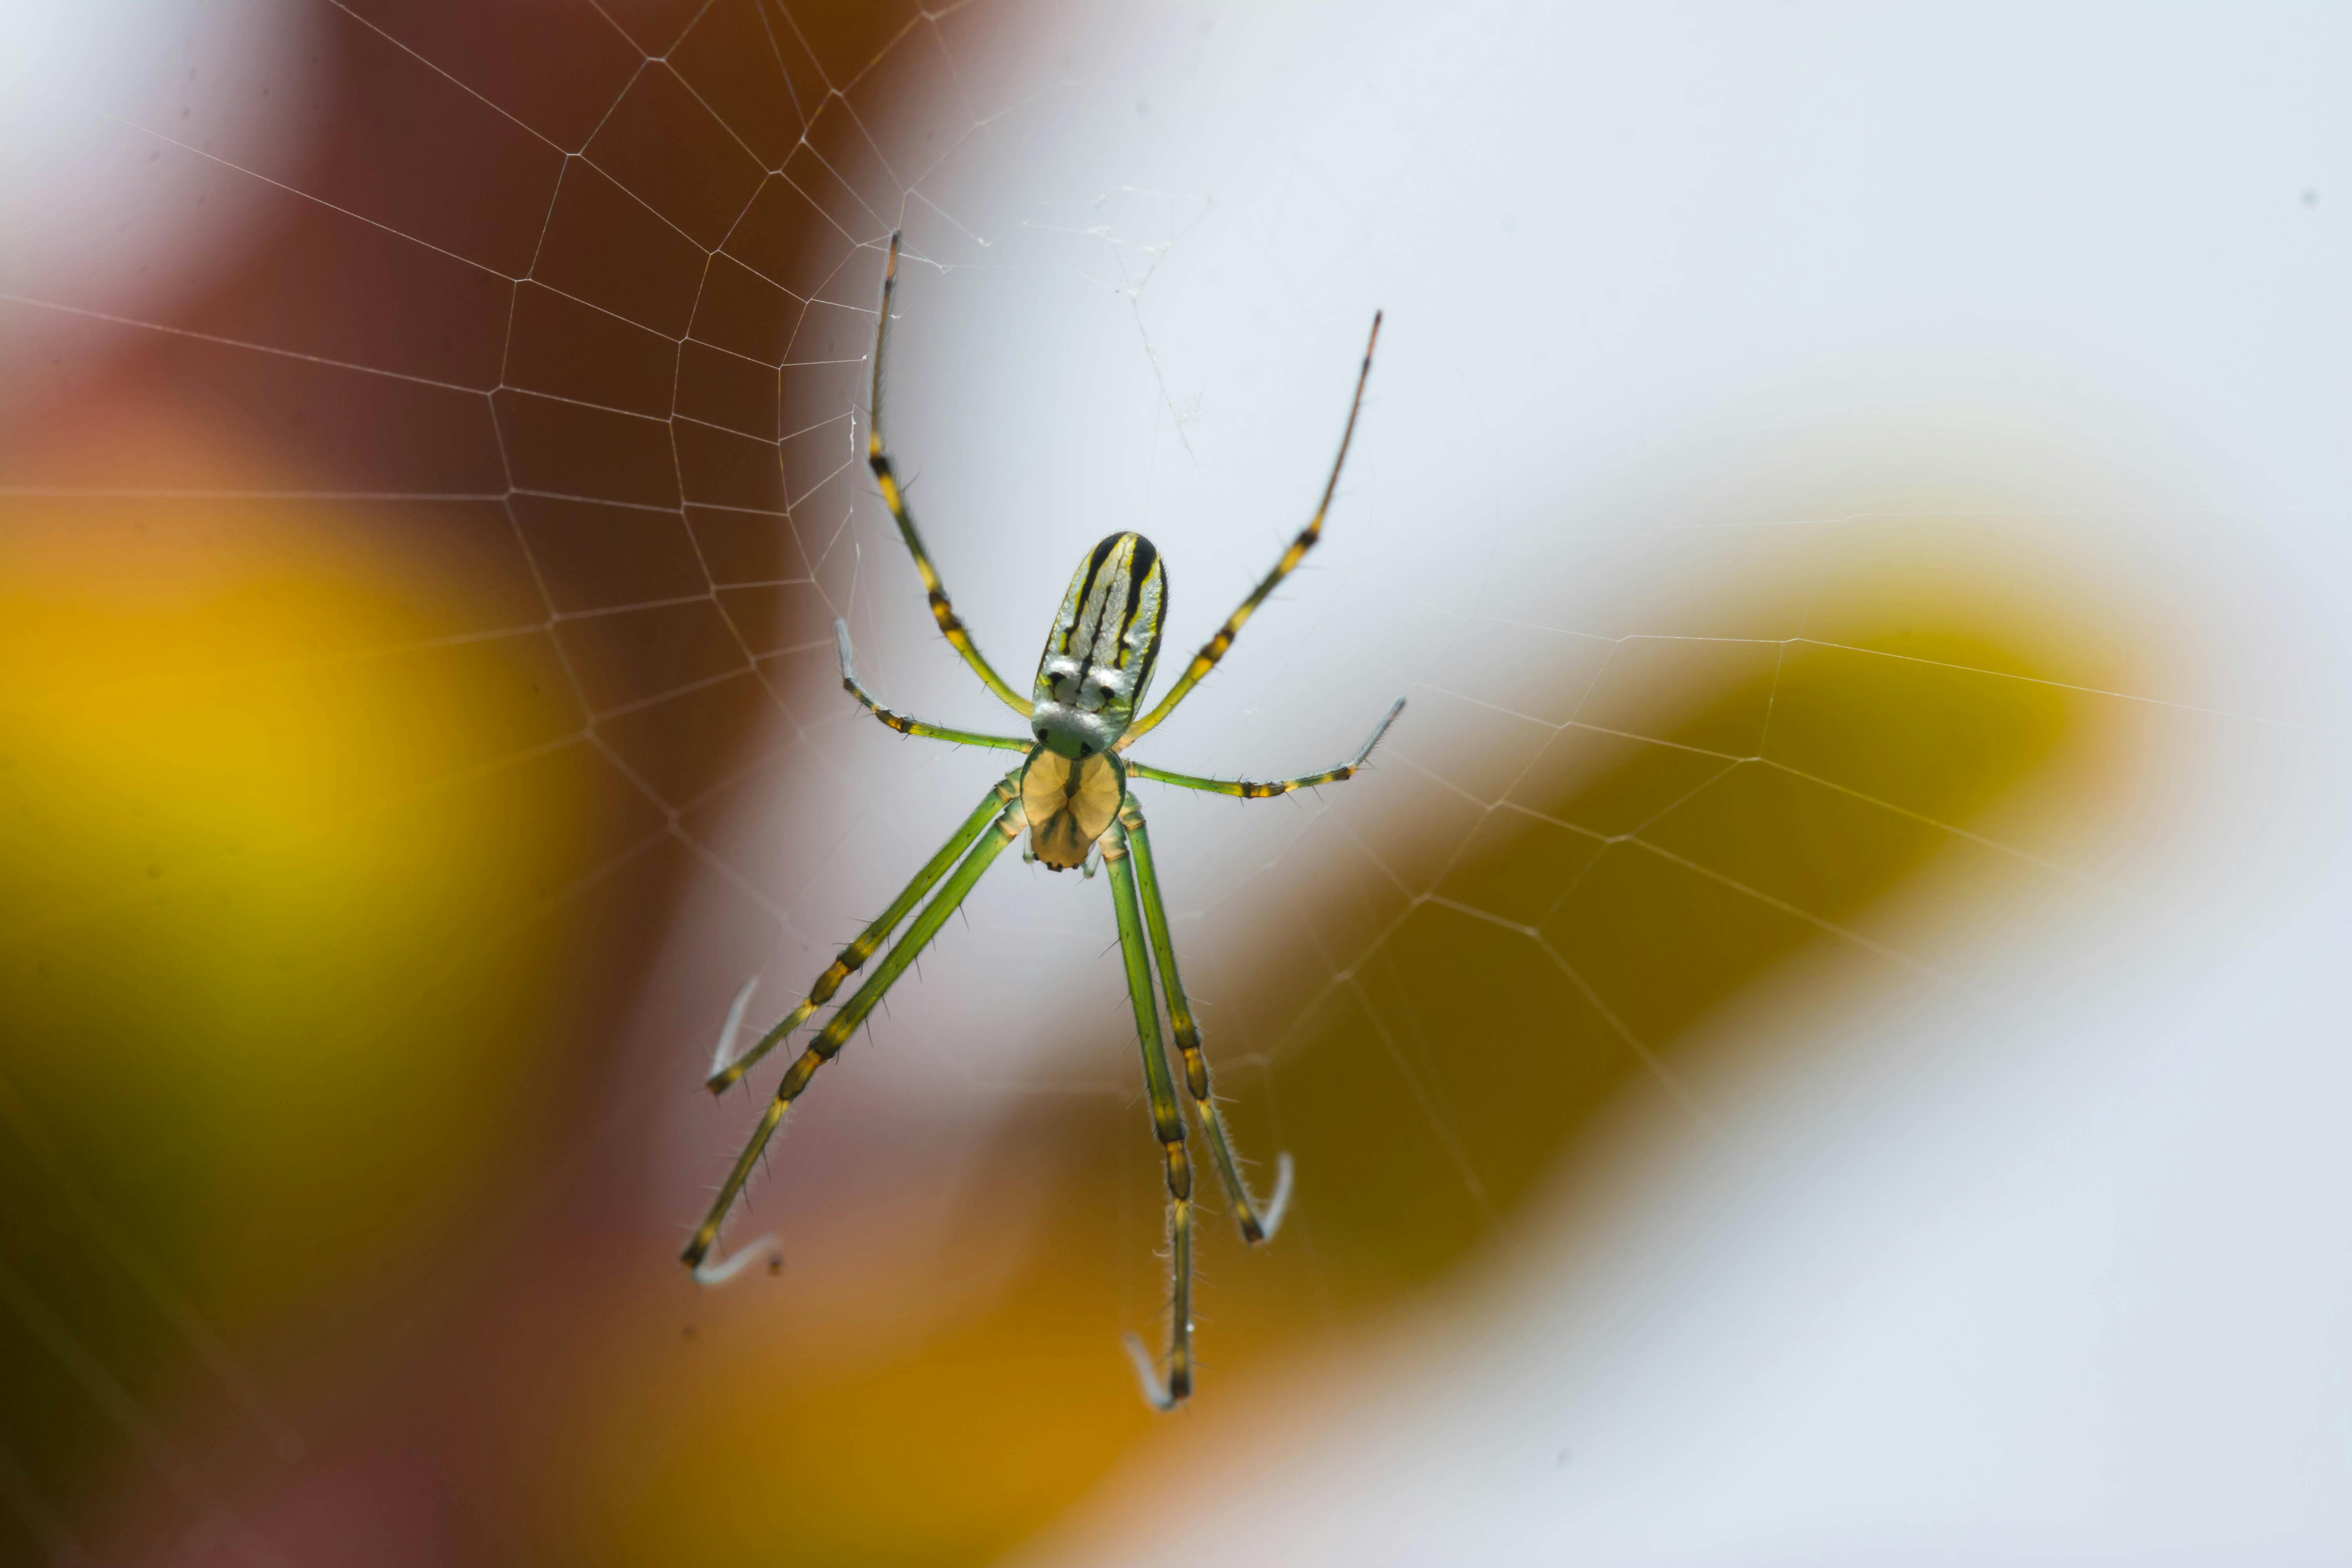 green and black spider on spider web in close up photography